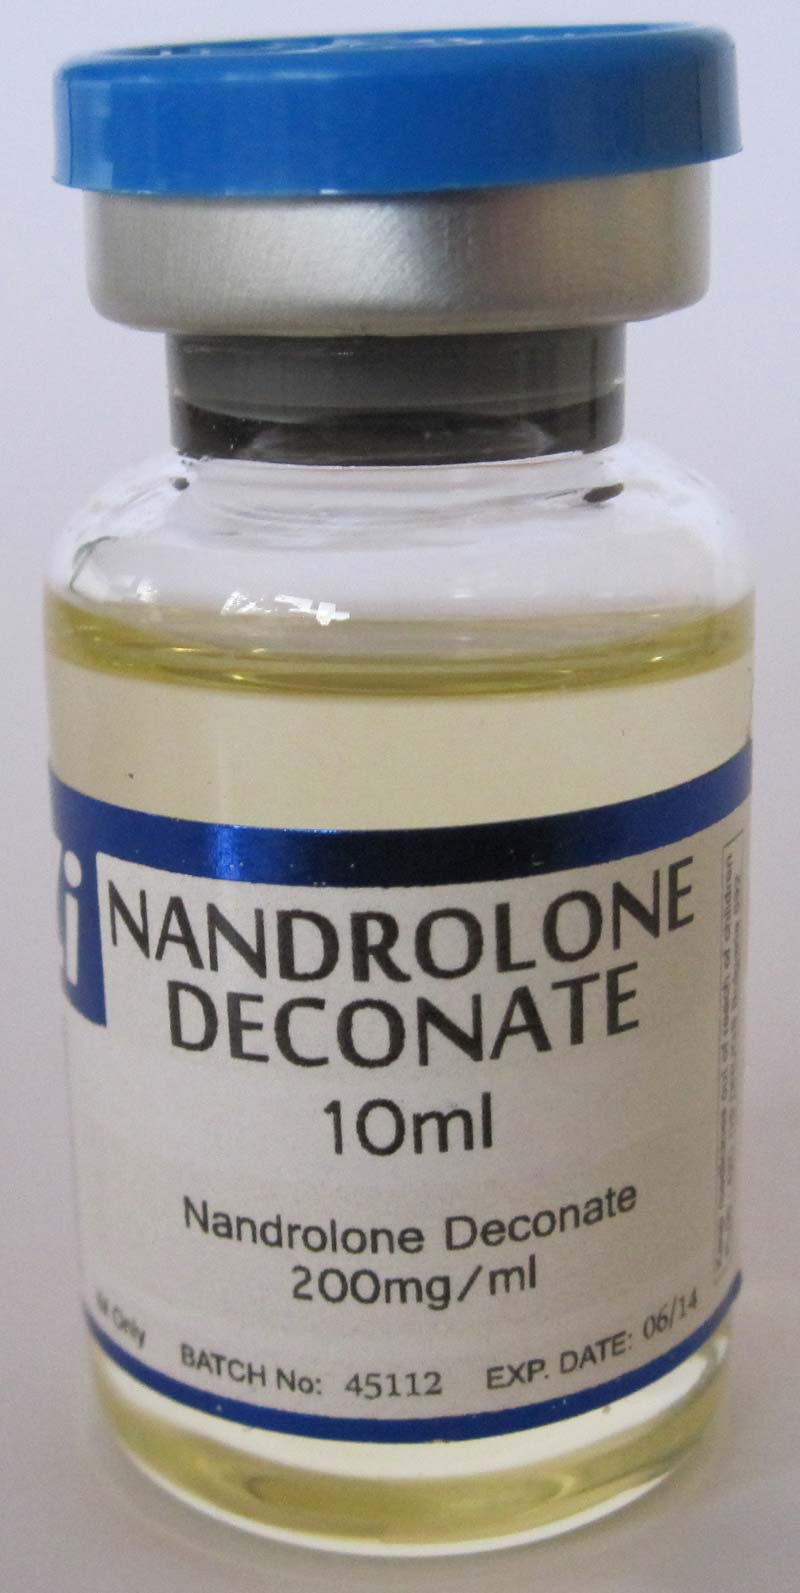 A Warning To Athletes About Nandrolone